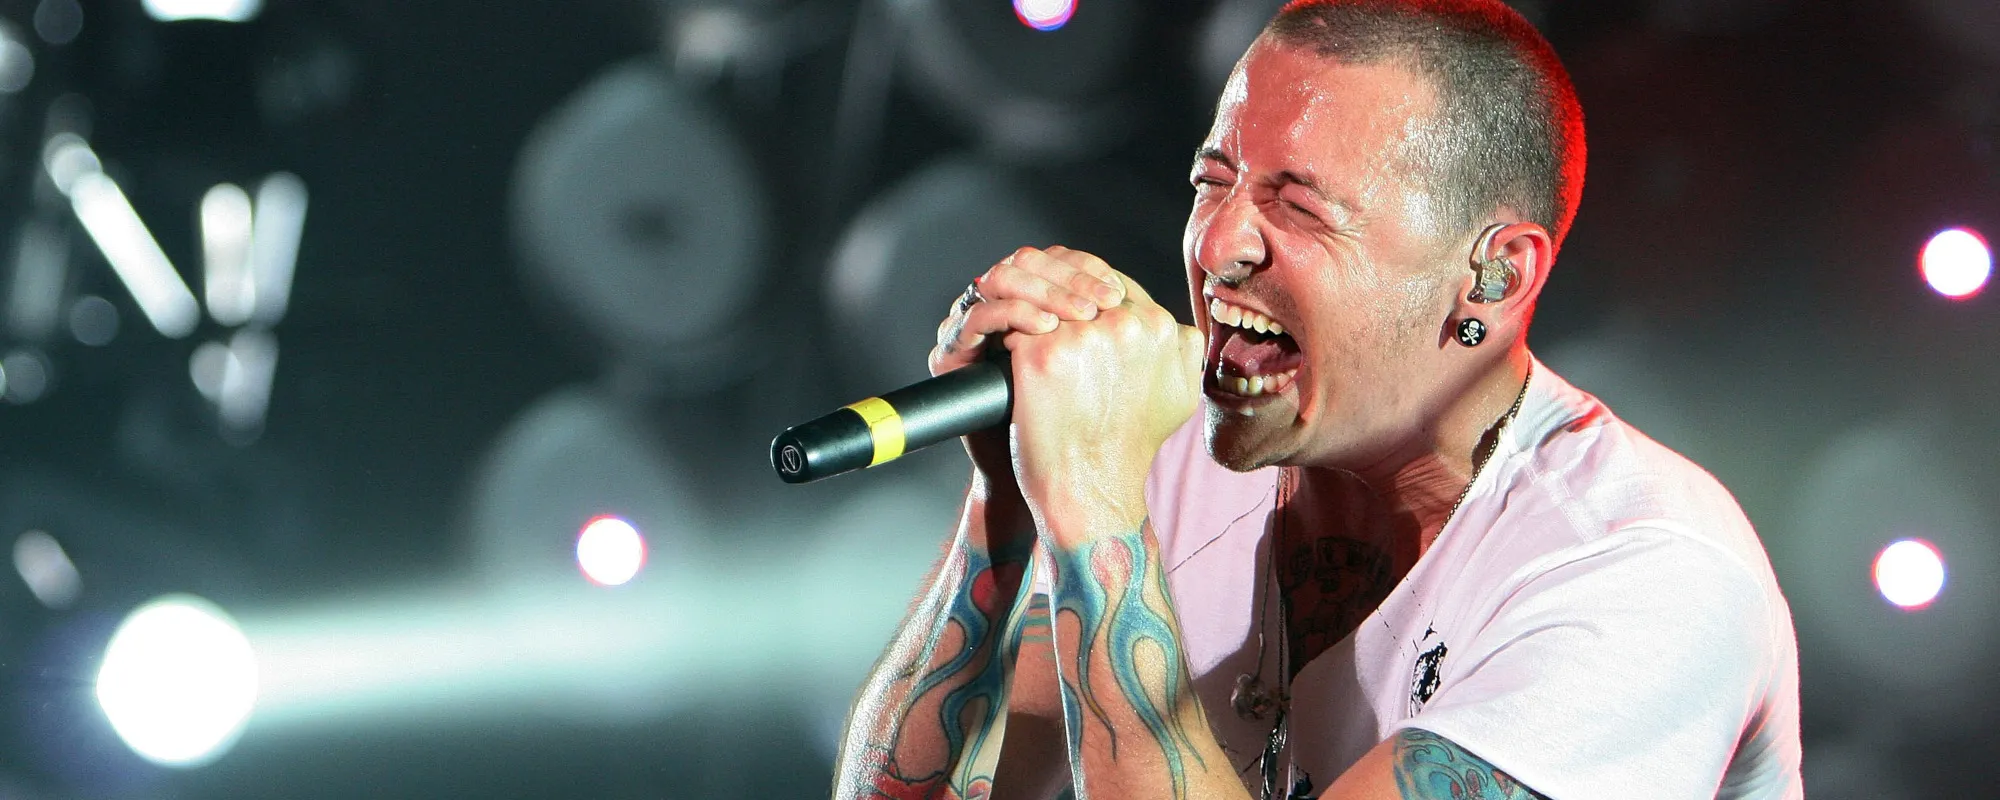 The 20 Best Chester Bennington Quotes: “As An Artist I Want a Reaction”